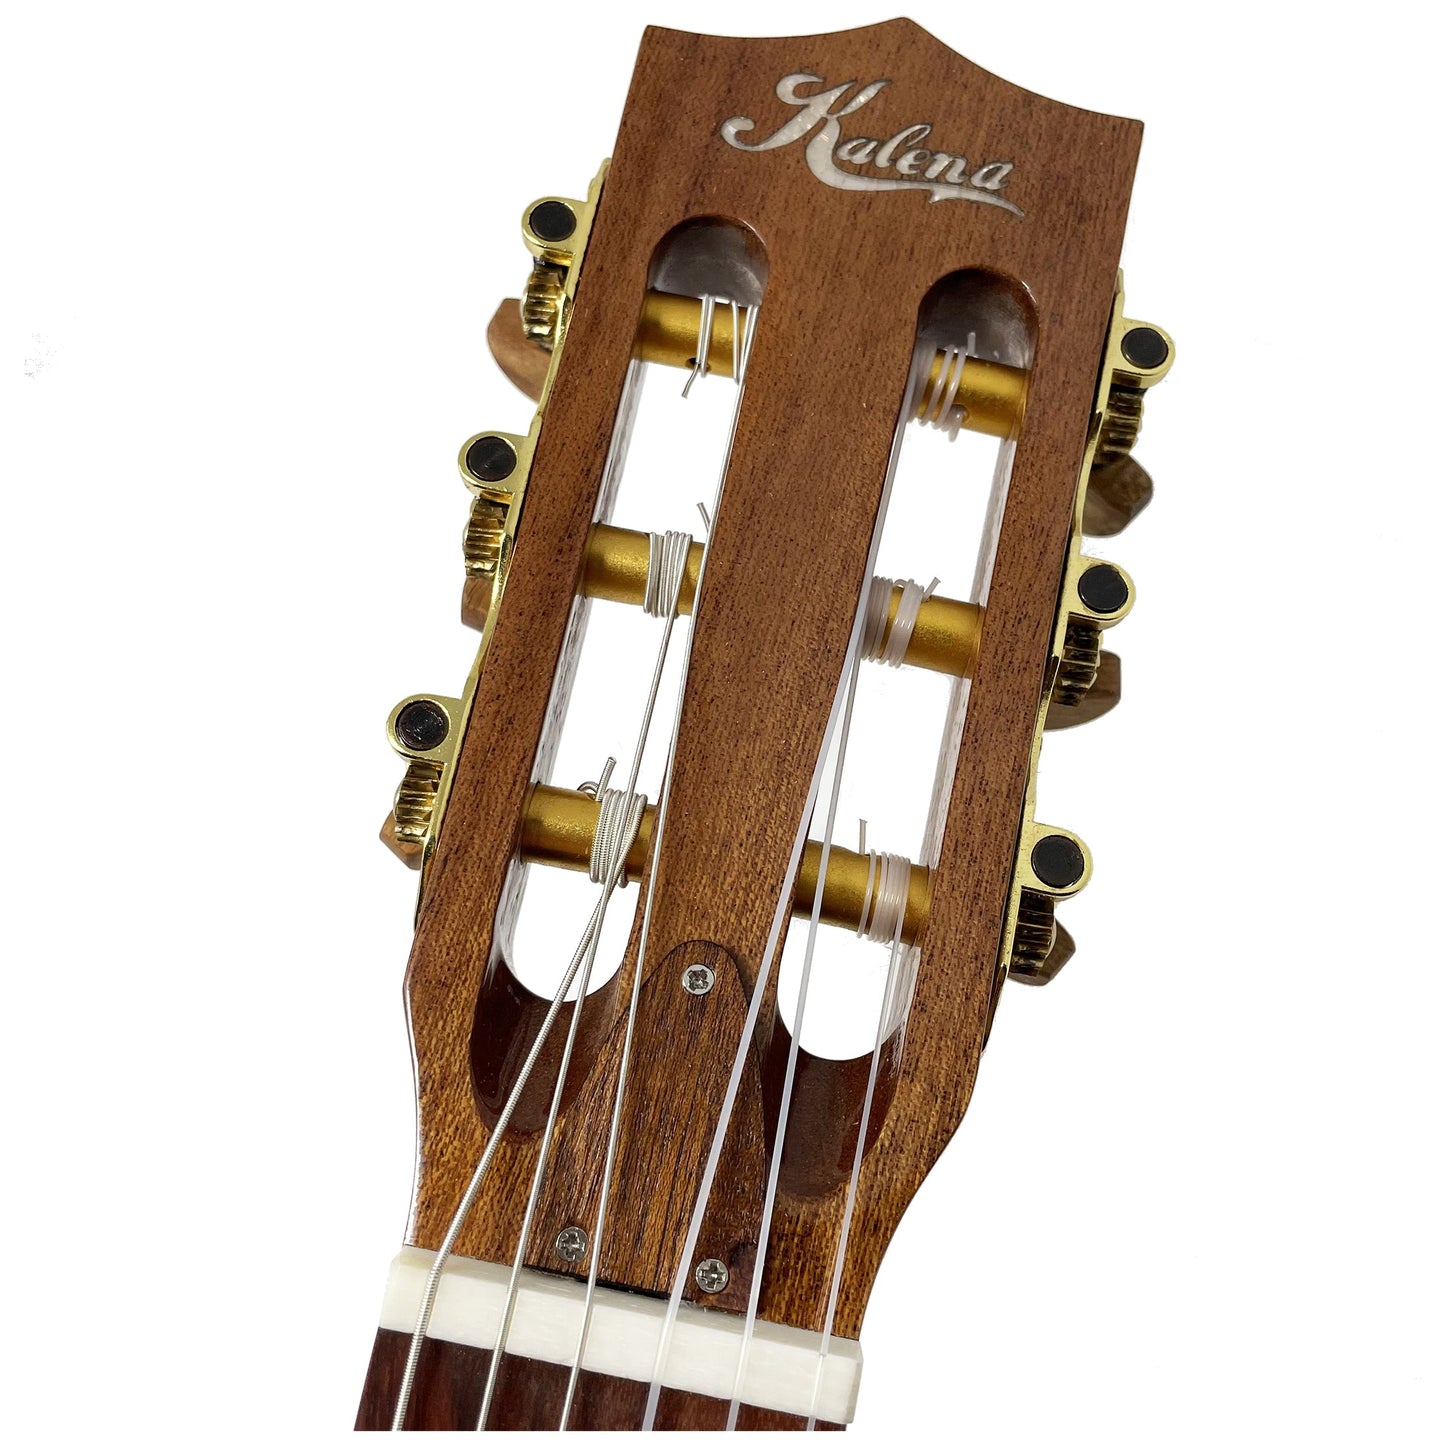 Kalena 28" Solid Spruce Top Guitalele with EQ pickup